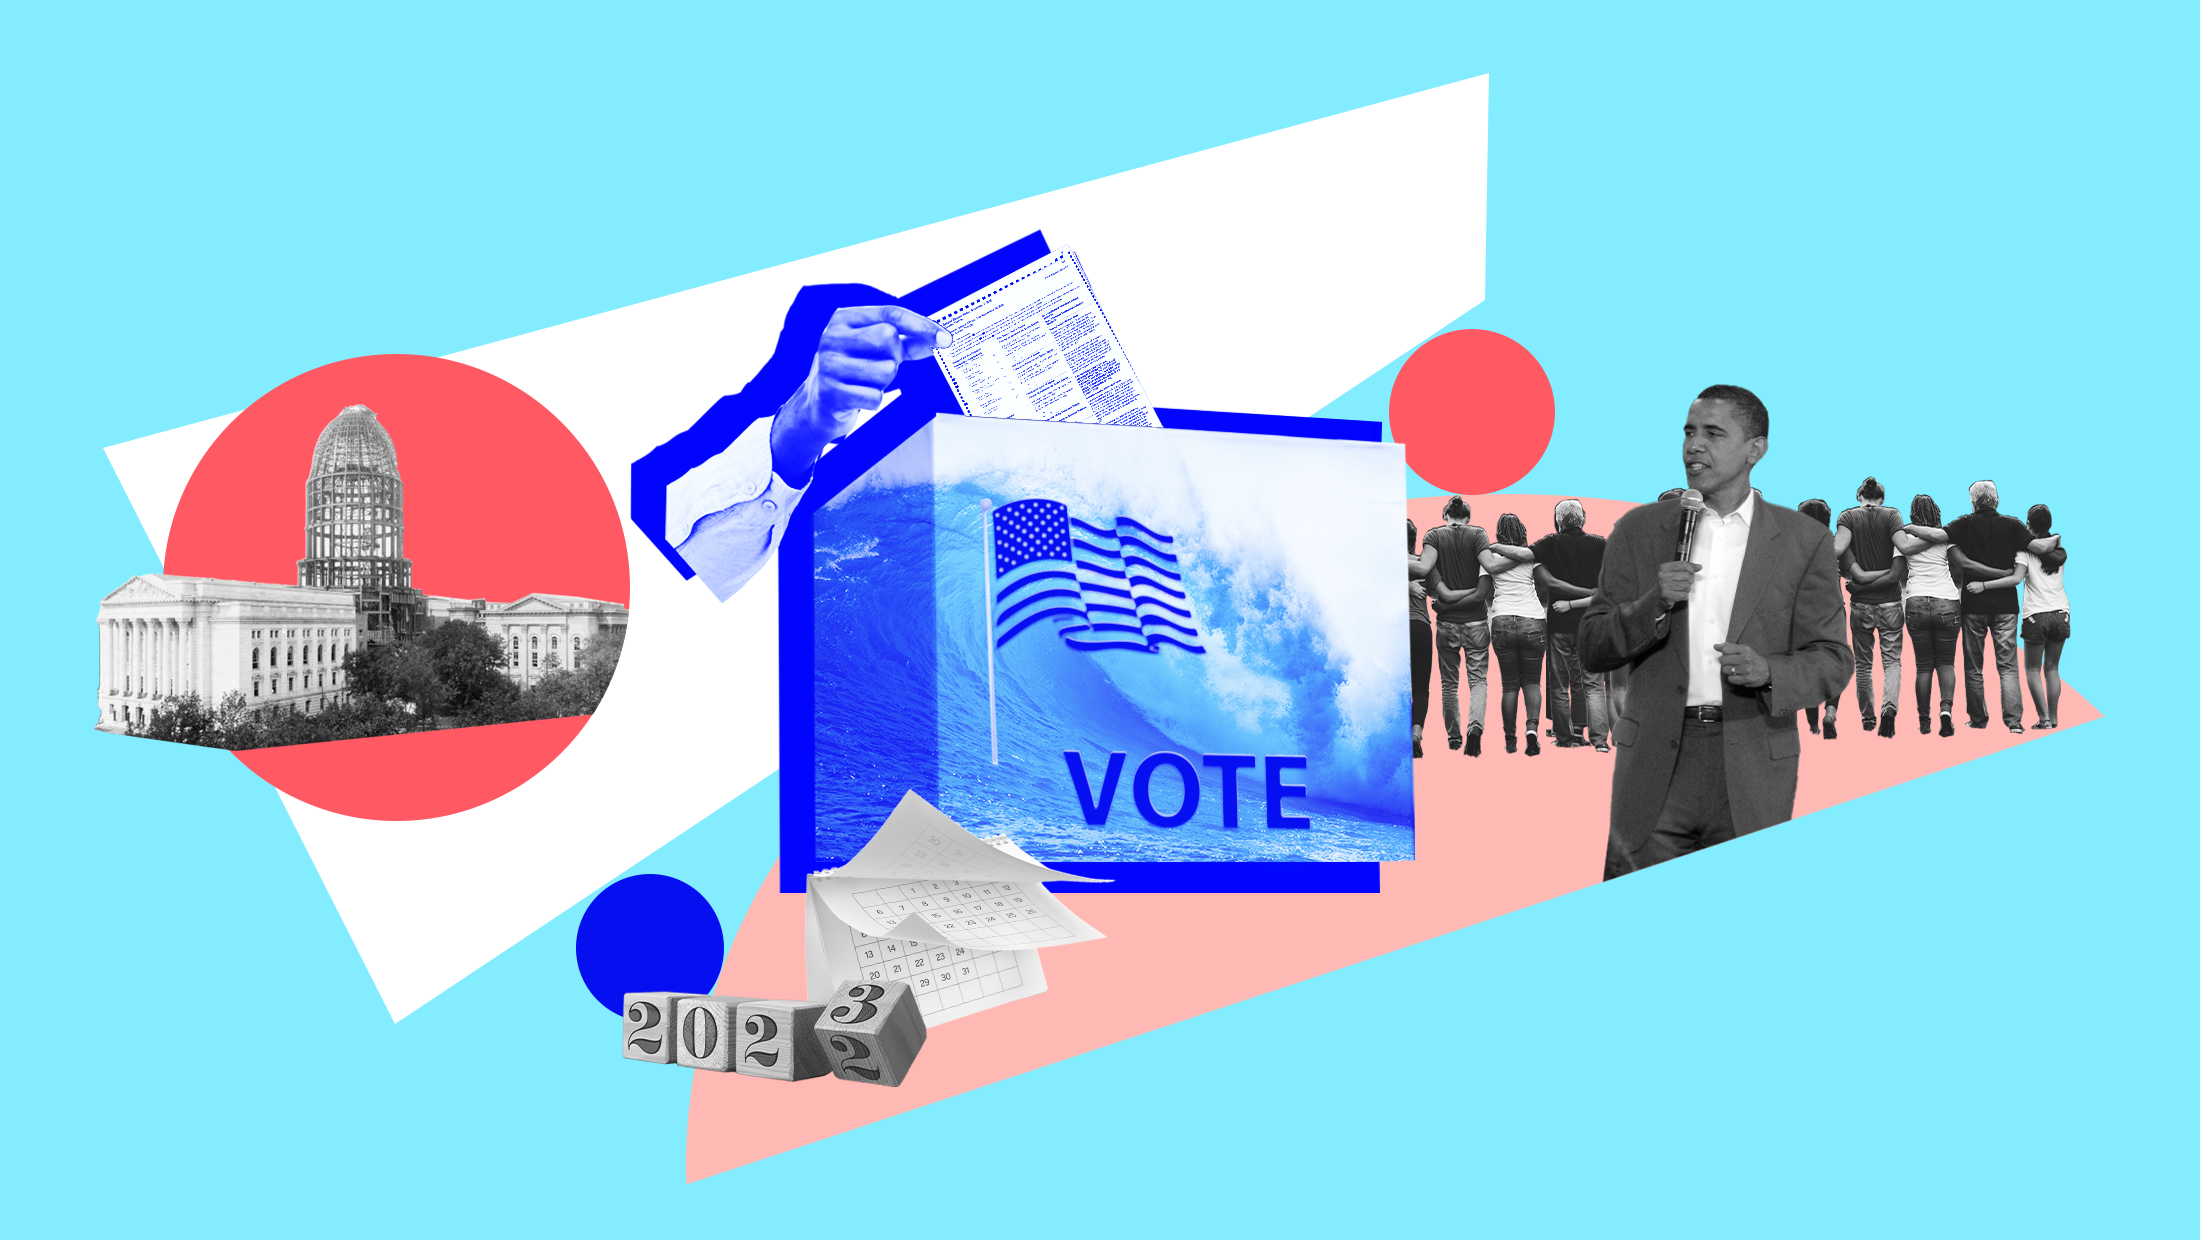 Light blue background with image of blue wave, an American flag and the word "VOTE" laid over a ballot box and someone inserting their ballot into the box, a black and white image of President Barack Obama speaking into a microphone in front of people facing their back to him with their arms wrapped around each other, a black and white image of the Wisconsin state capitol under construction and a black and white image of a calendar and "2023" in blocks